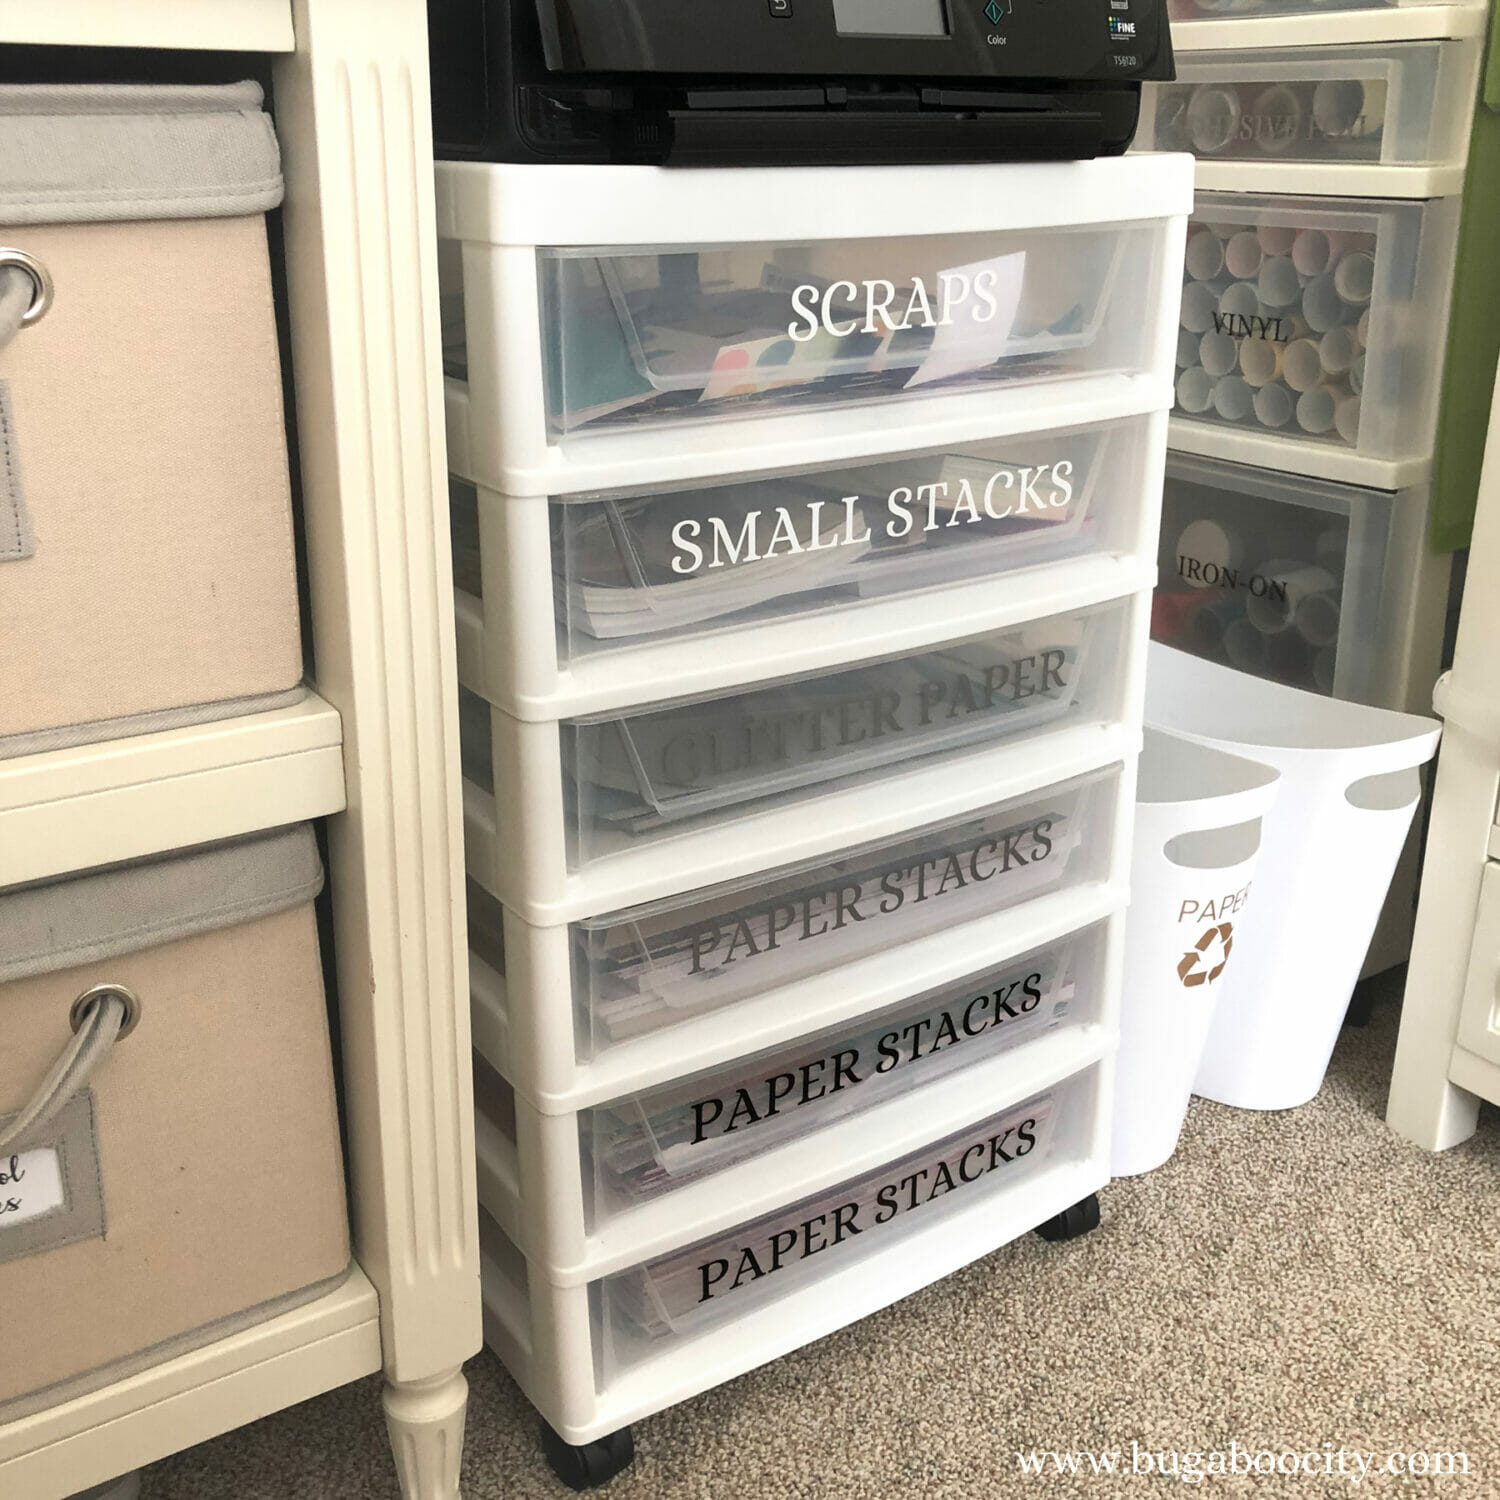 How to Organize Vinyl Scraps (Tips and Tricks)